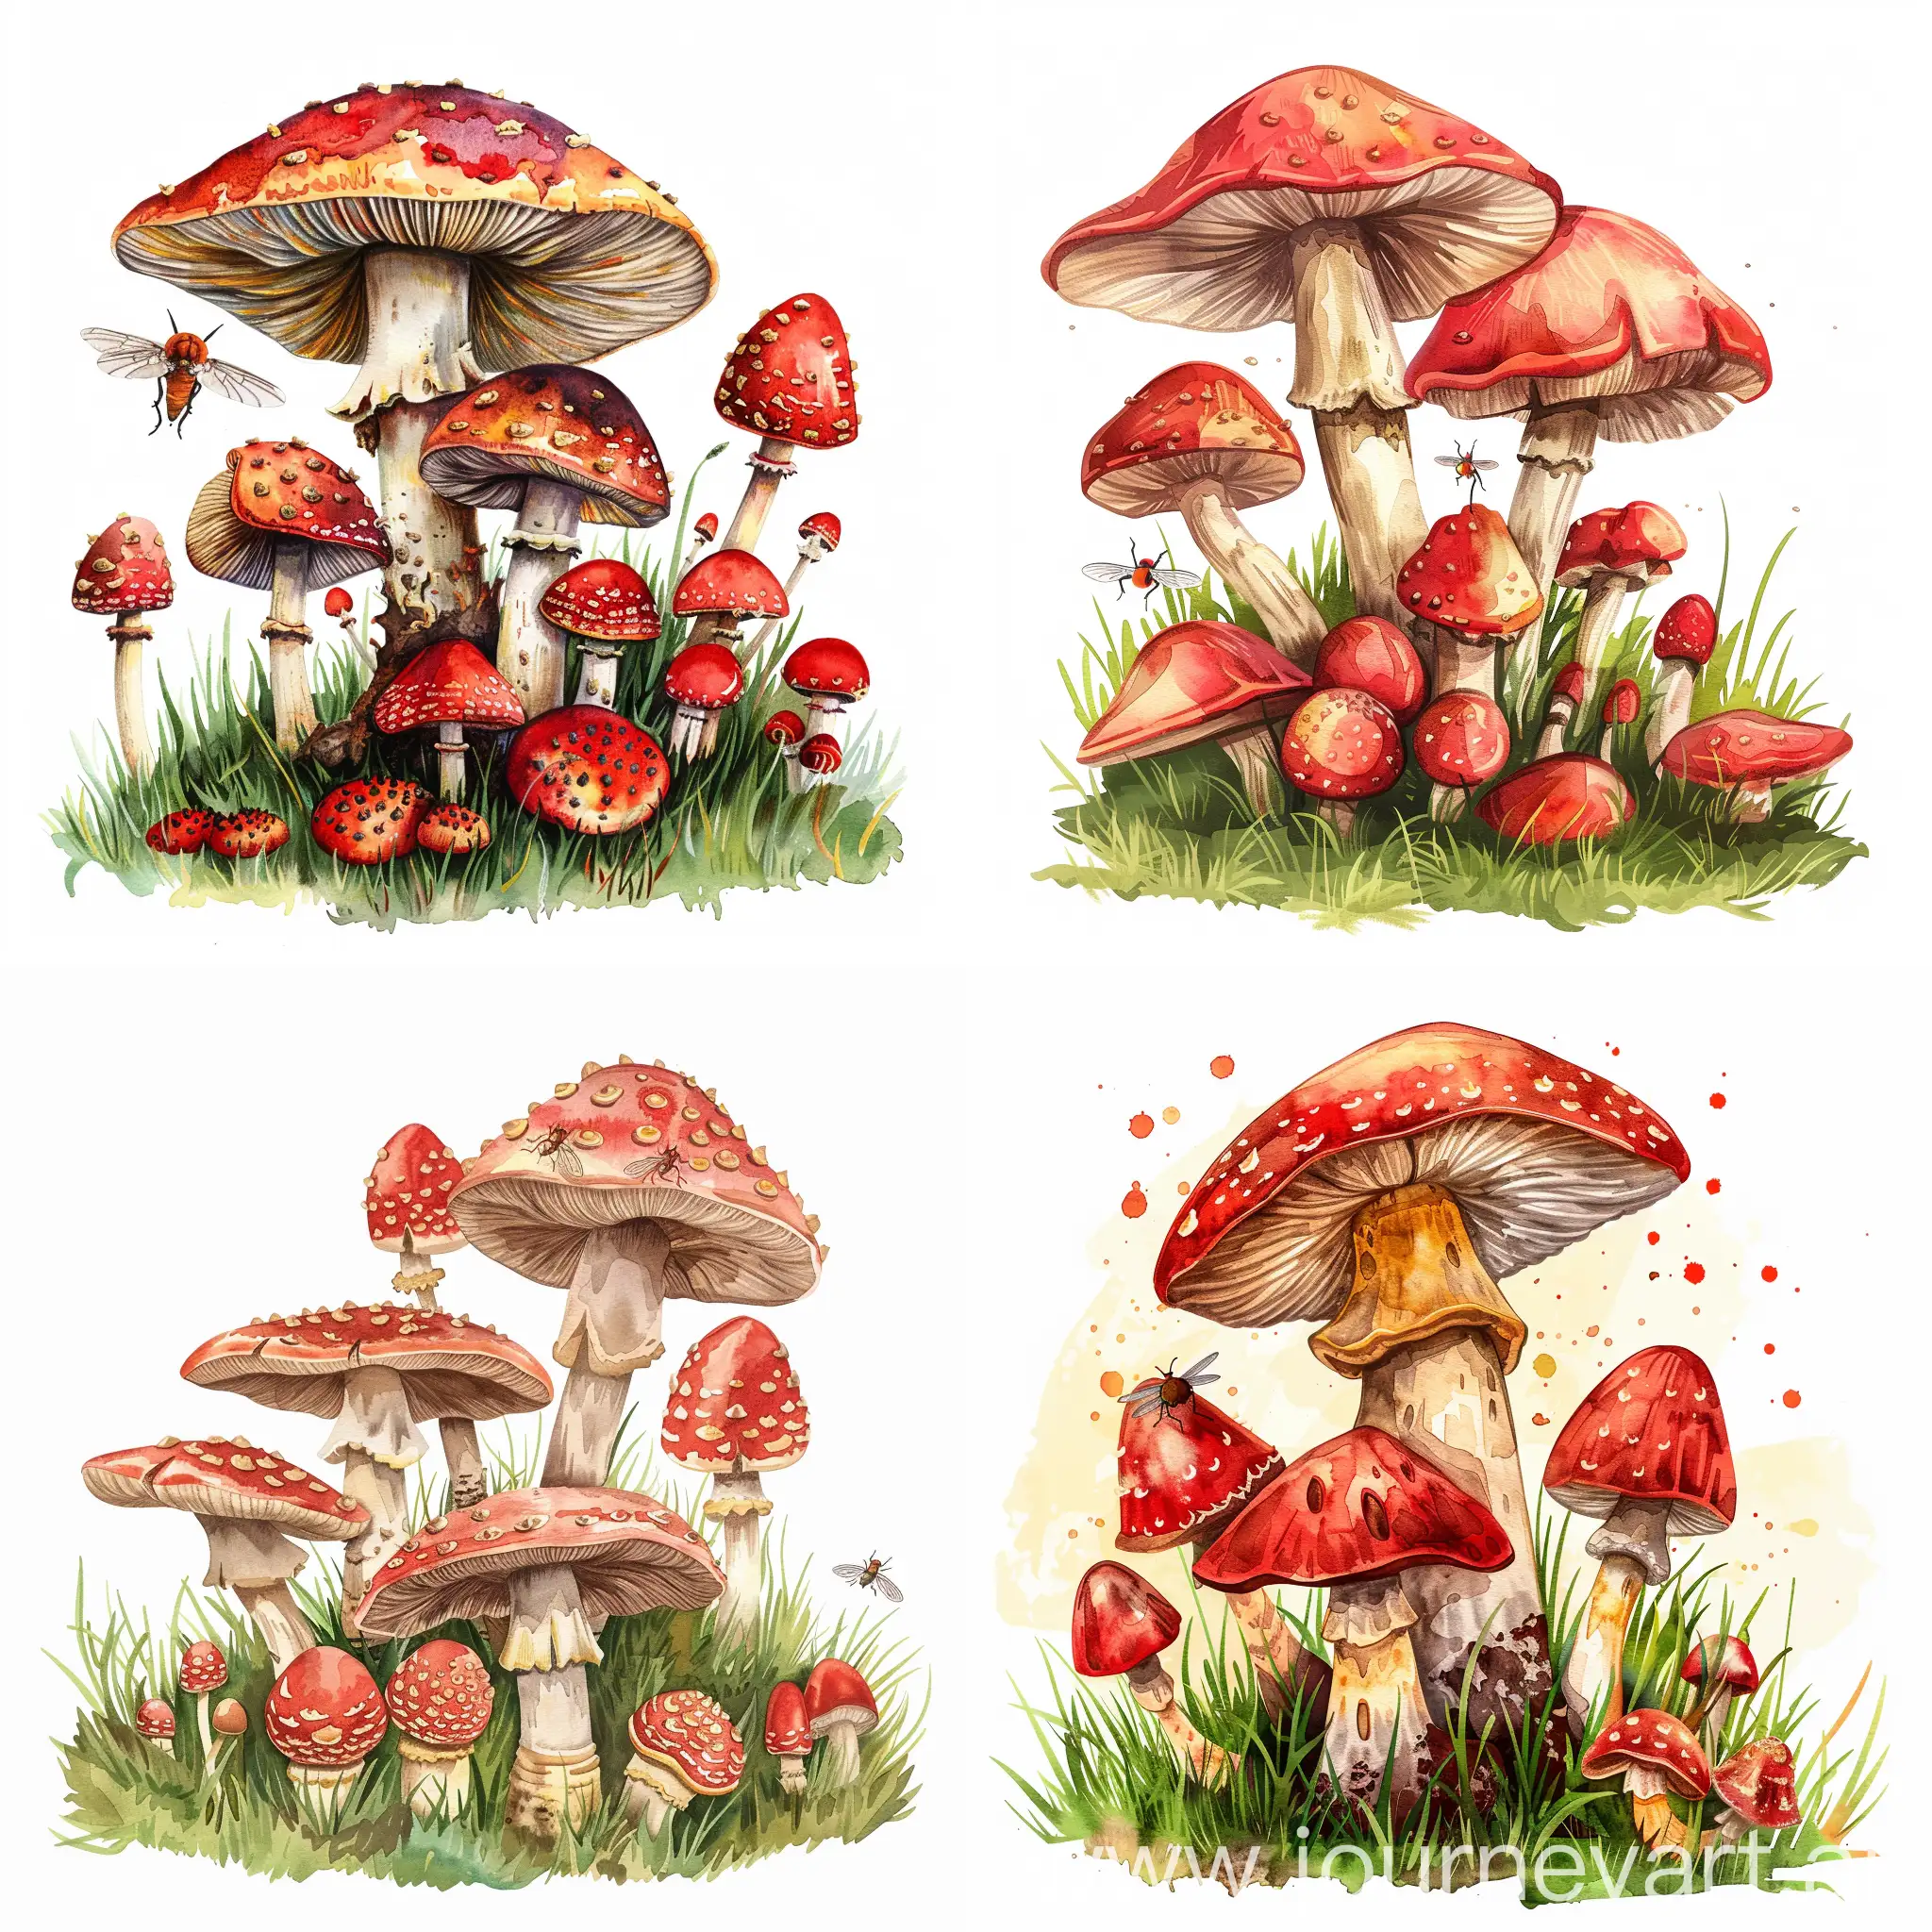 Vivid-Watercolor-Cartoon-Illustration-Colorful-Fly-Agaric-Pile-on-Grassy-Meadow